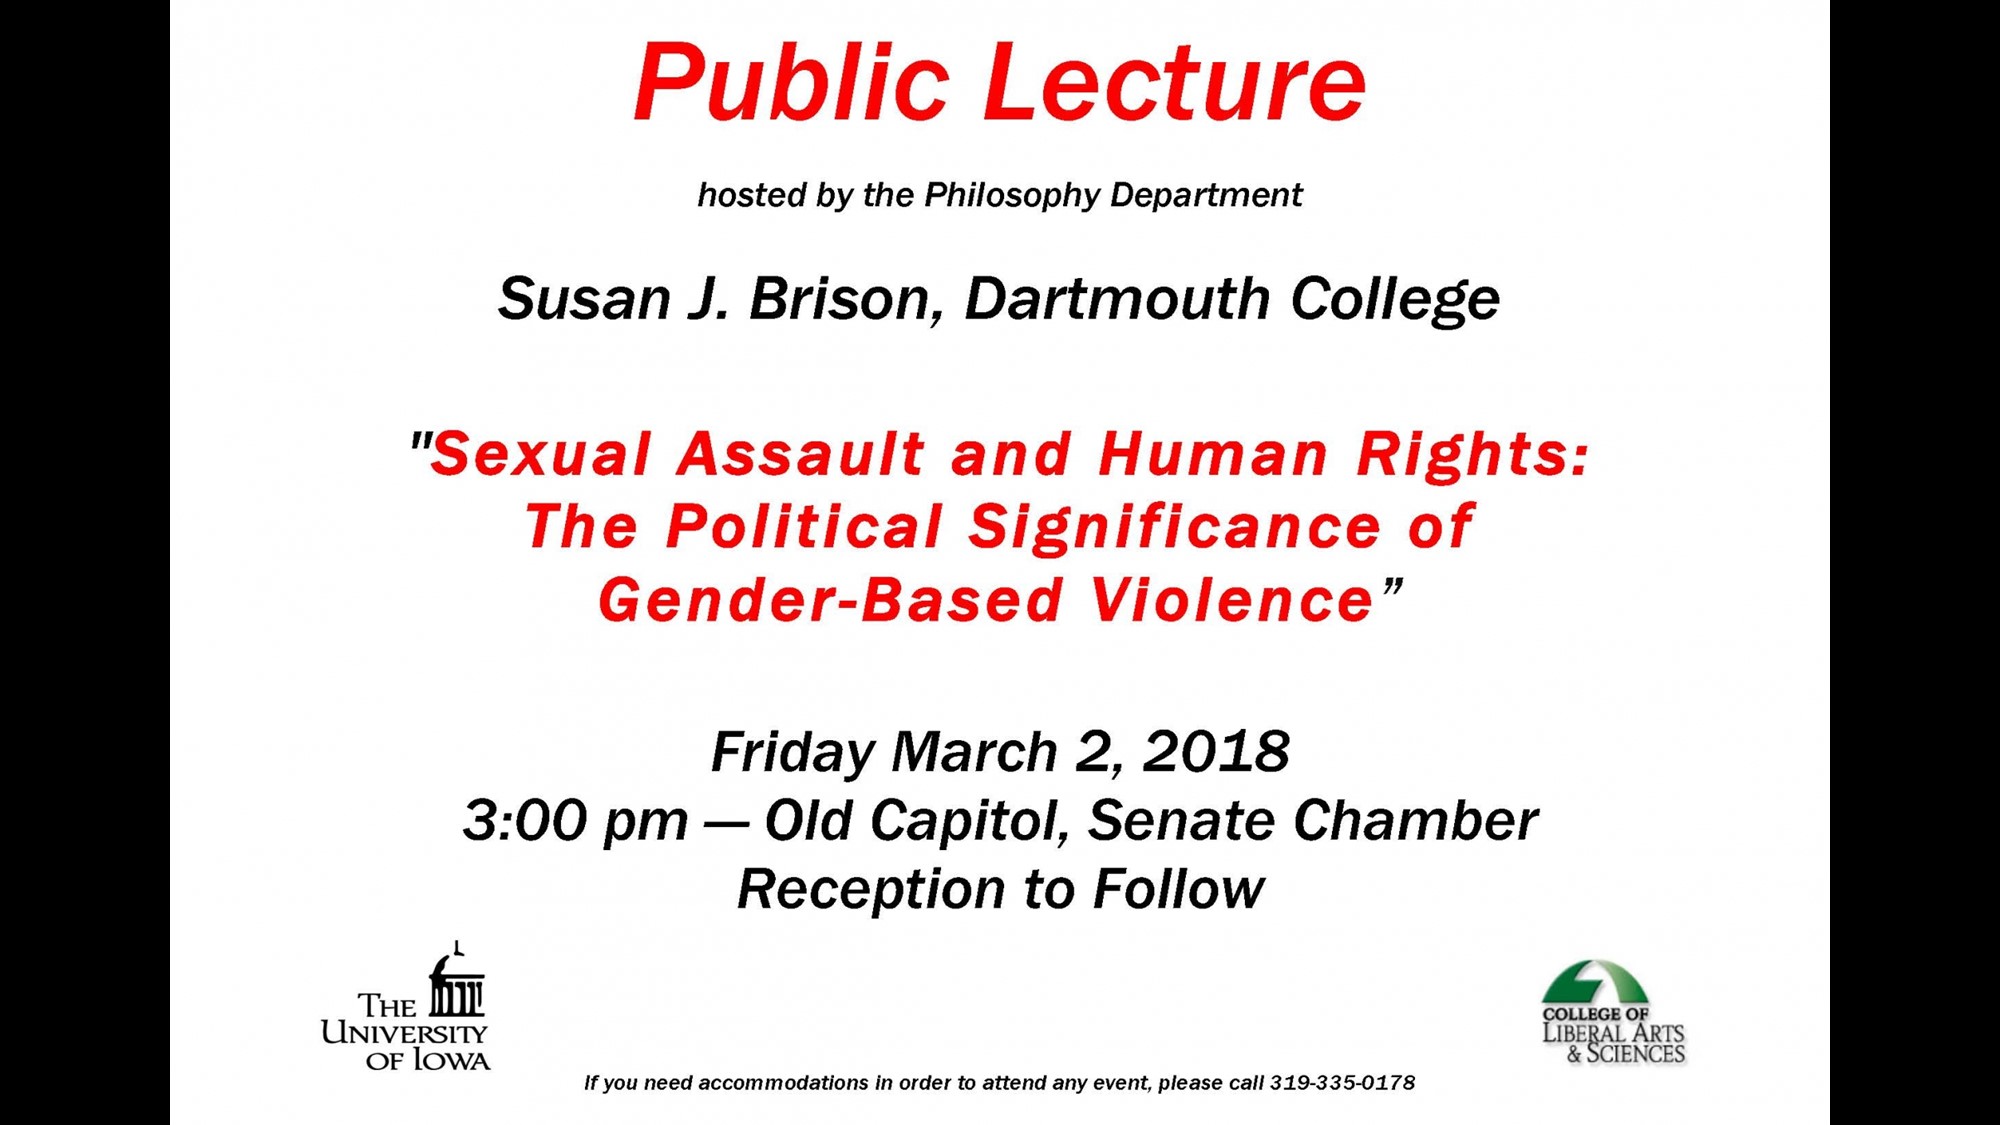 Public Lecture hosted by the Philosophy Department  Susan J. Brison, Dartmouth College  "Sexual Assault and       Human   Rights: The       Political Significance of Gender-Based Violence”  Friday March 2, 2018 3:00 pm — Old Capitol, Senate Chamber Reception to Follow